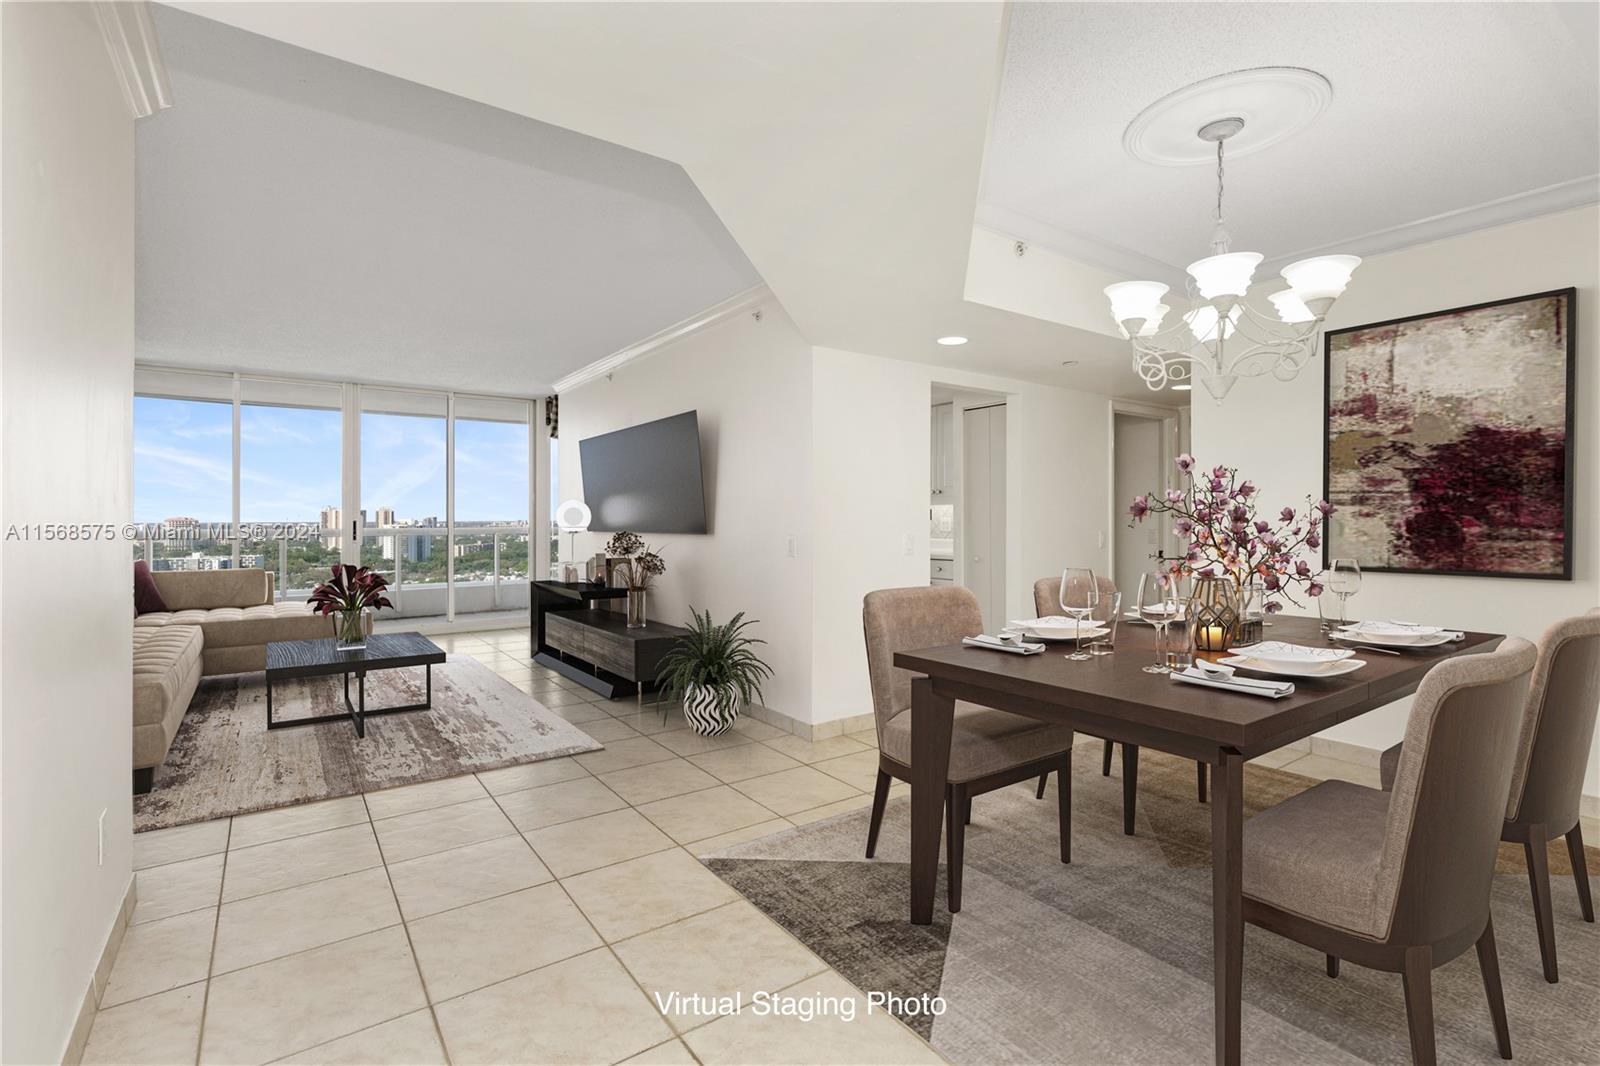 Experience luxury living in this 2-bed, 2-bath condo at prestigious North Tower at The Point. Enjoy 